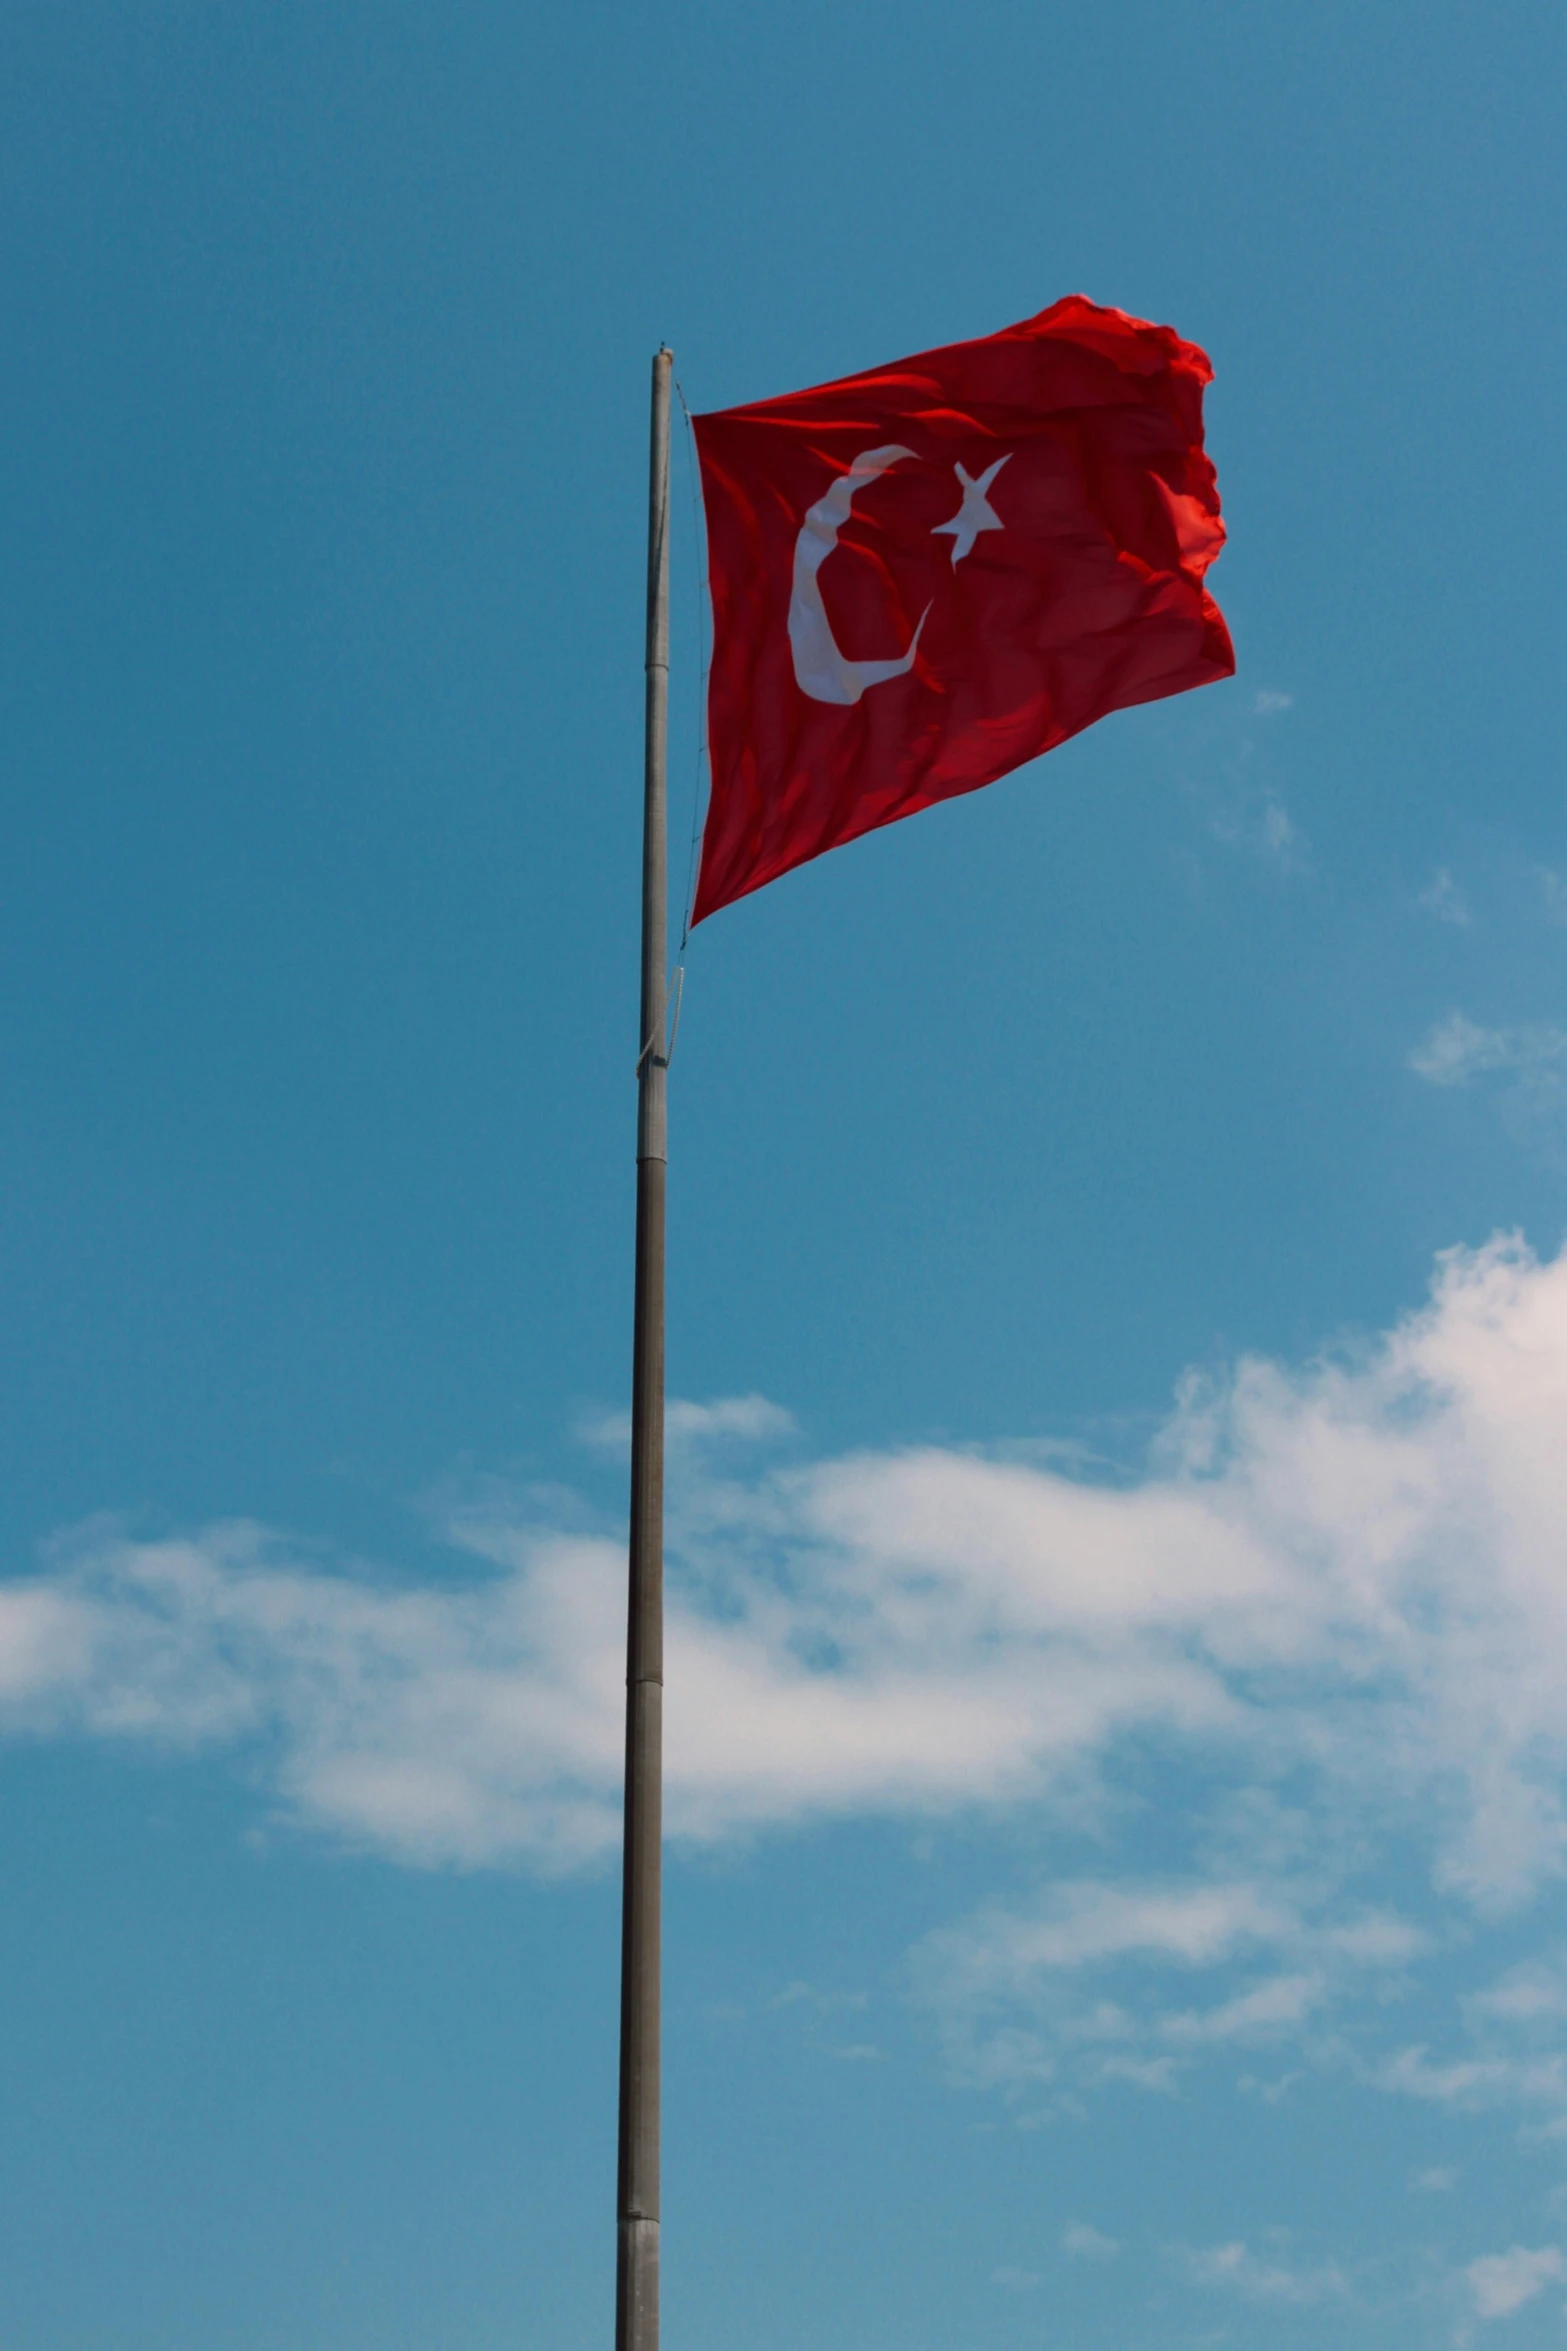 the flag of turkey flies in the wind